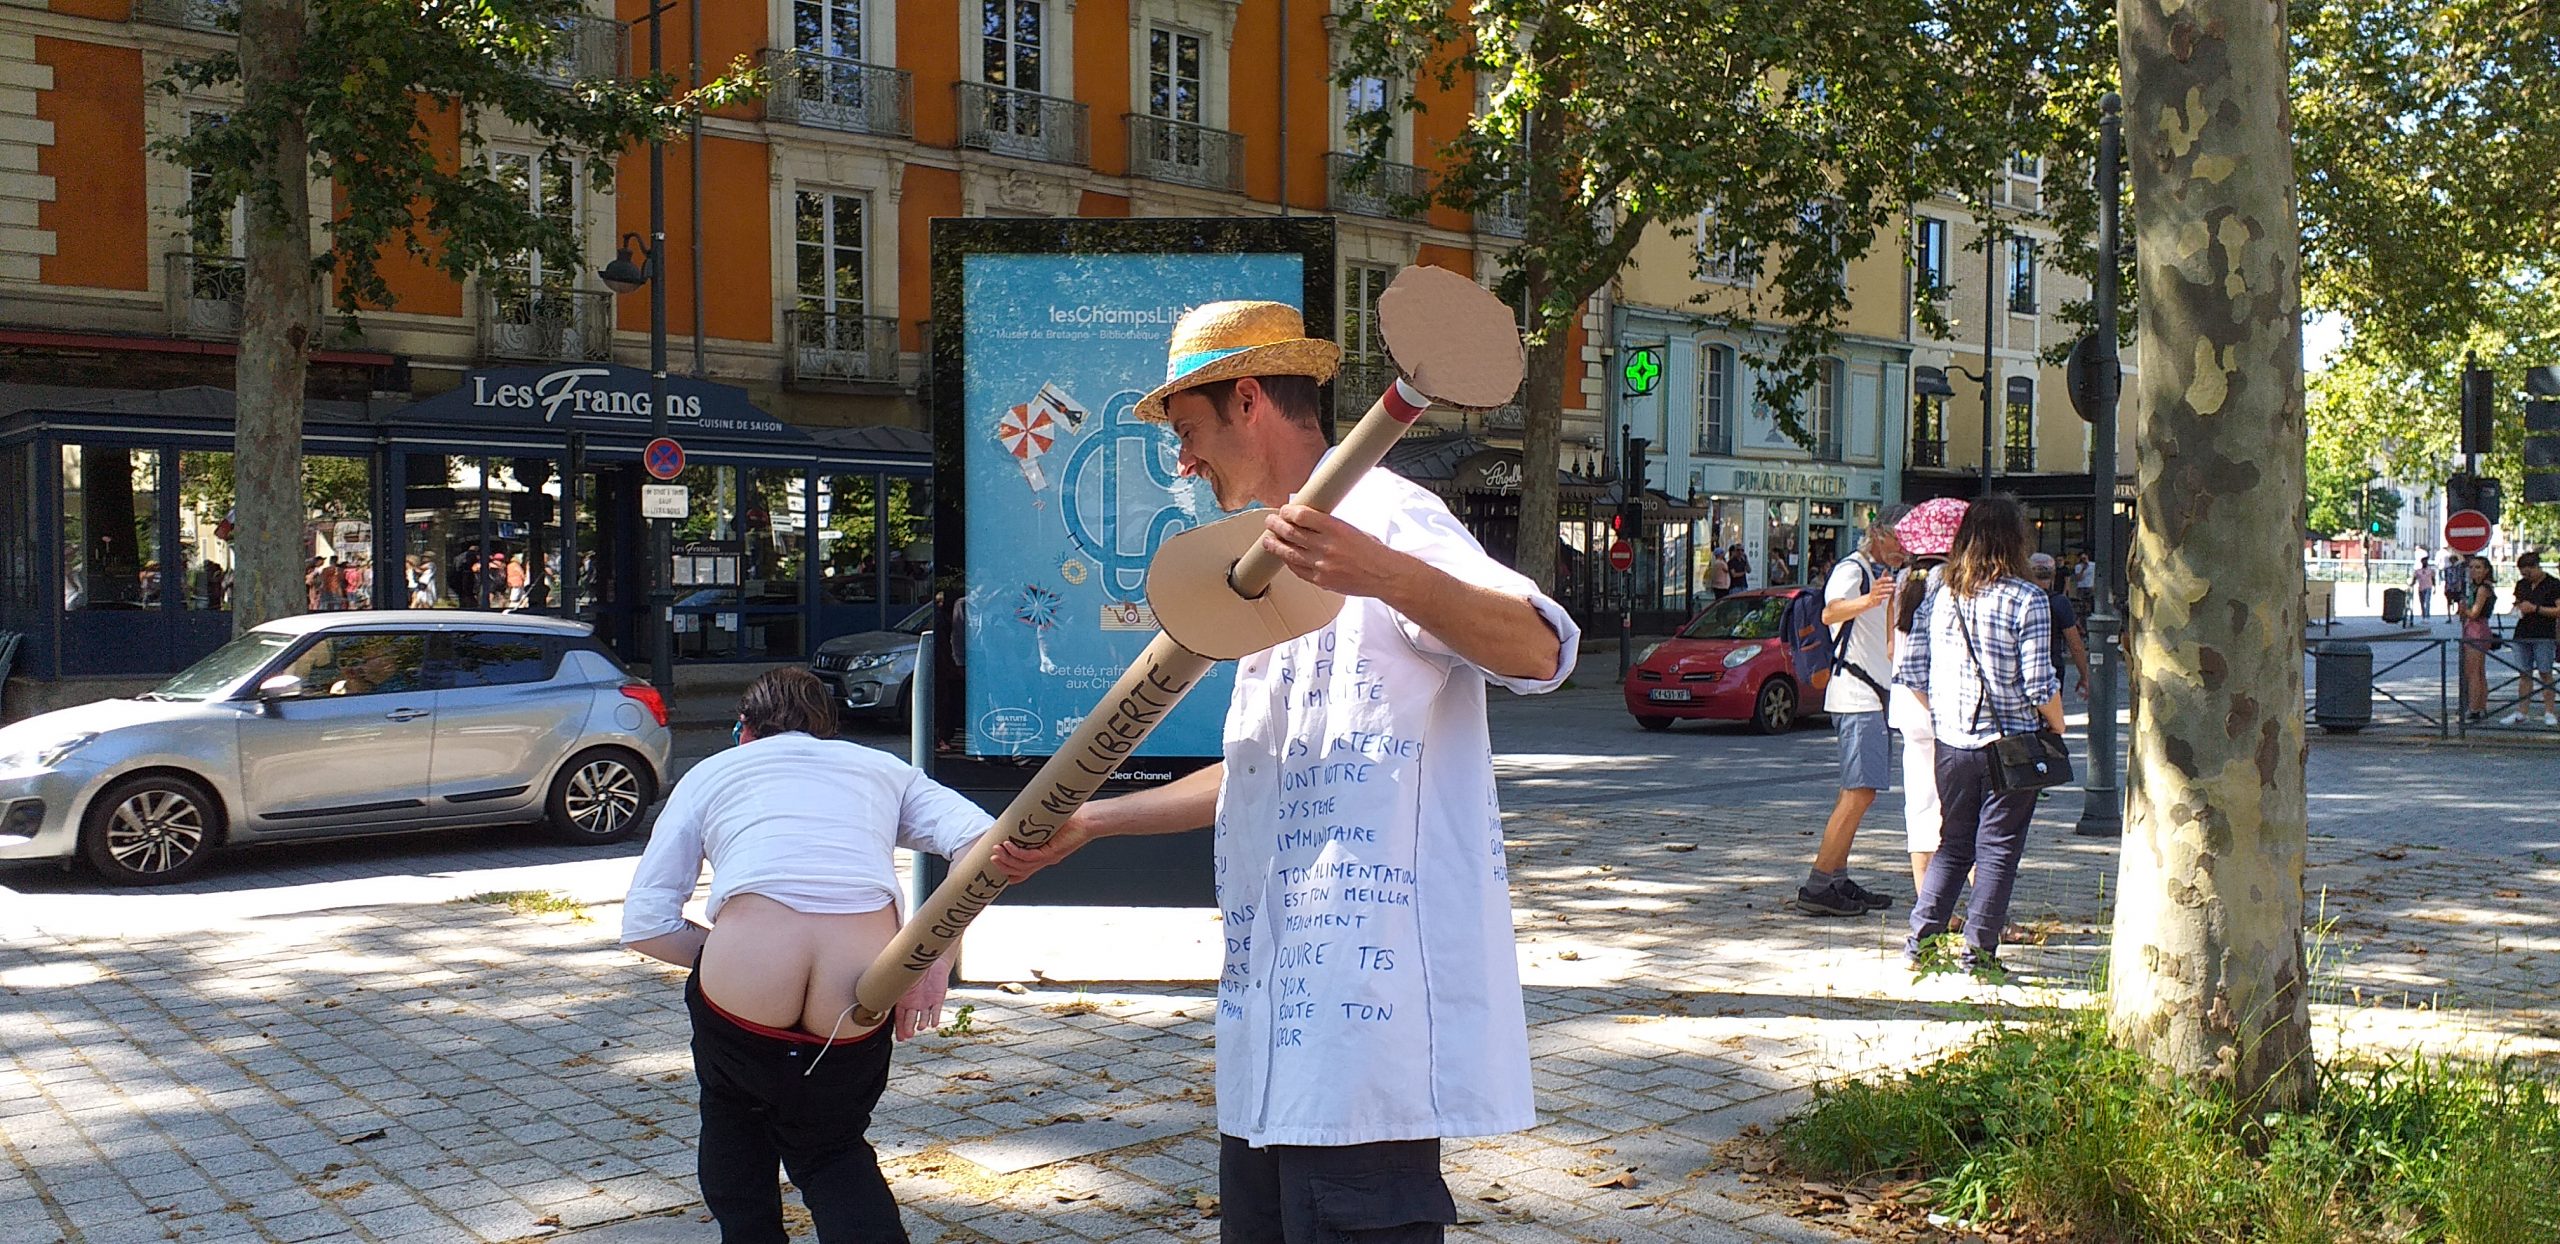 « Antipass » demonstrations in France